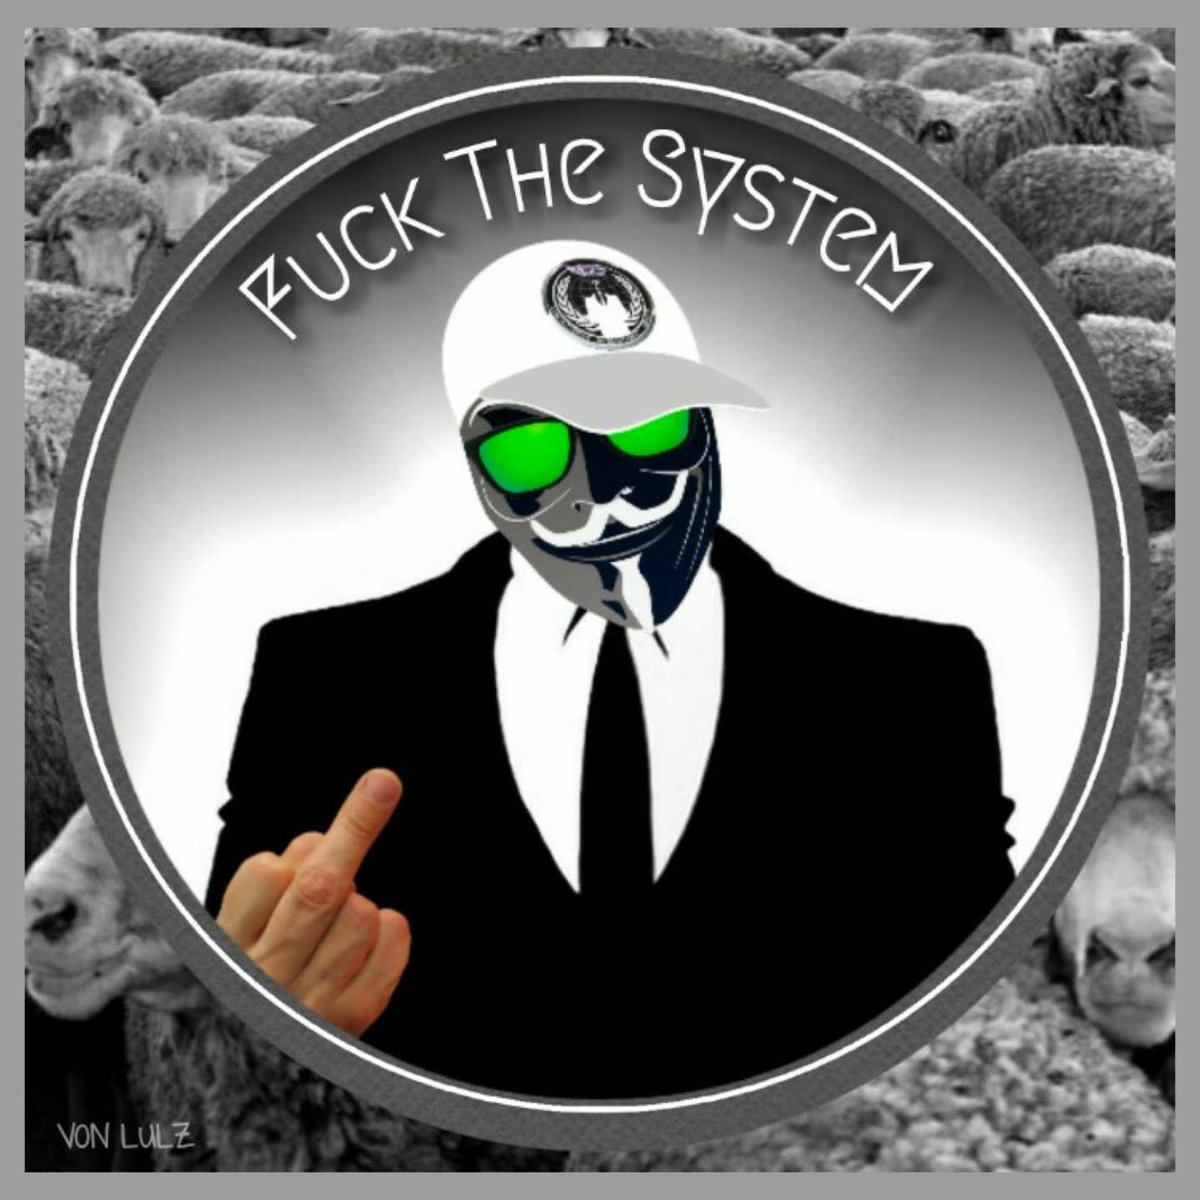 And dont forget to #FuckTheSystem 😉